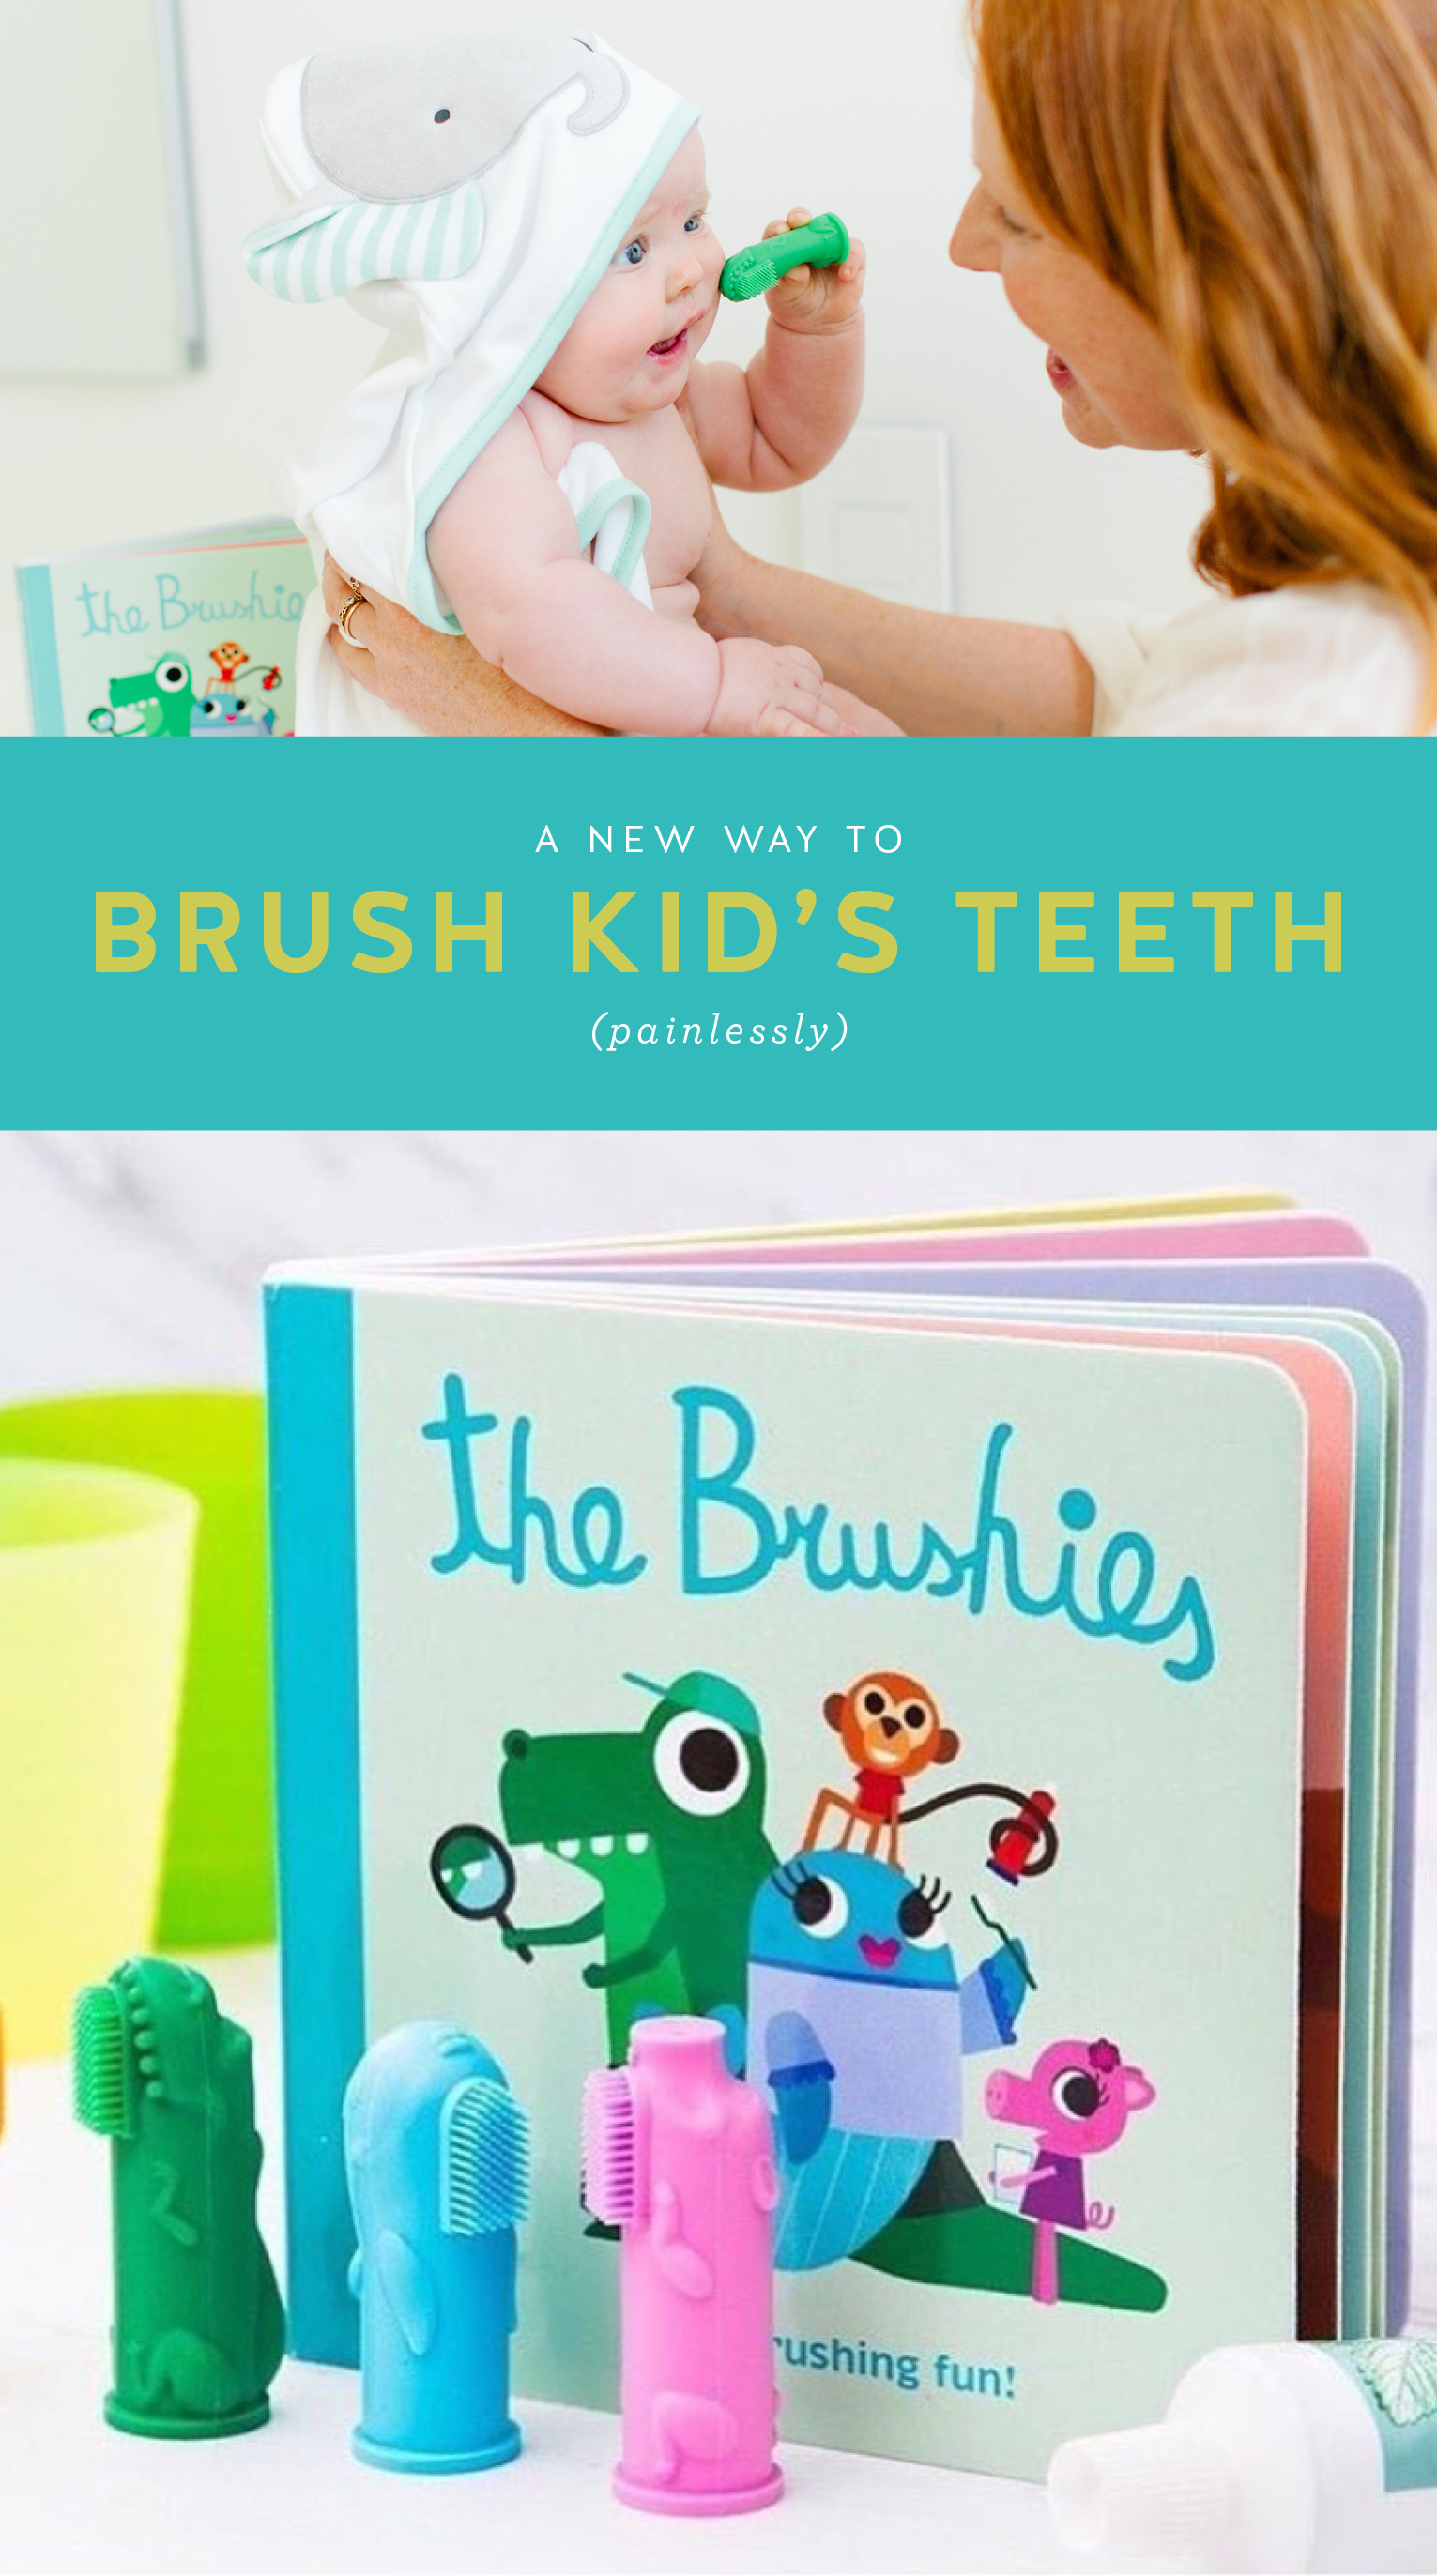 Mom helps baby brush teeth with brushies. Brushies book and toothbrushes.